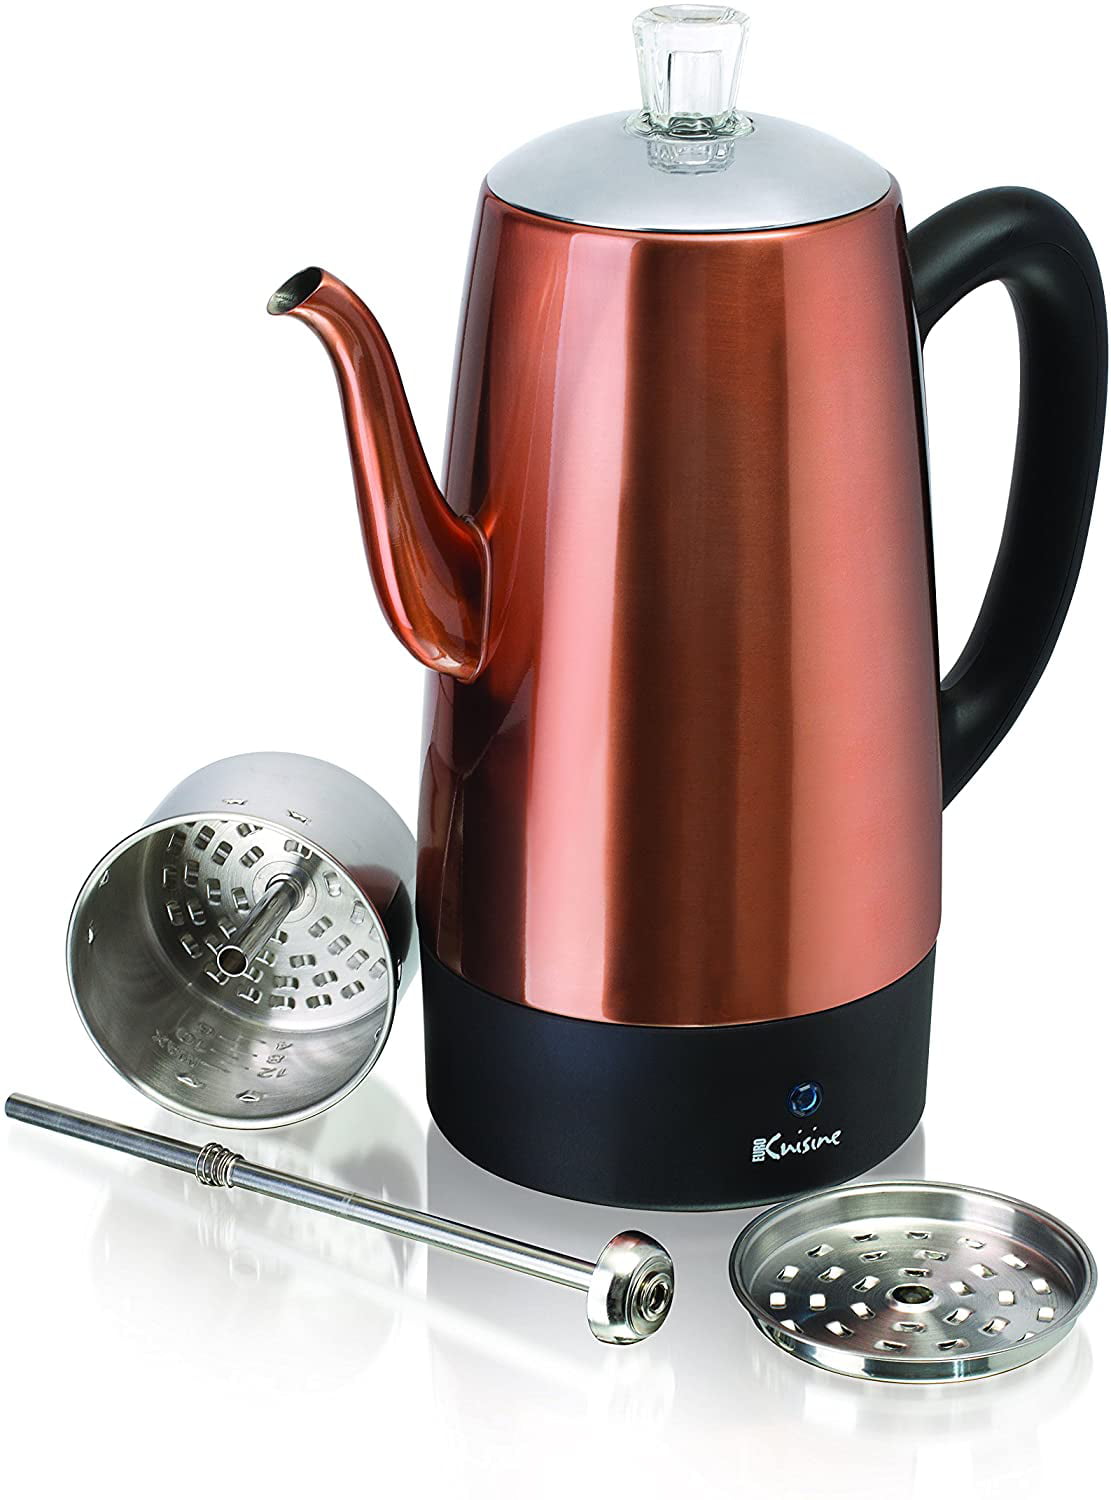 Euro Cuisine PER08 Electric Percolator 8 Cup Stainless Steel Coffee Pot Maker 4 Cup